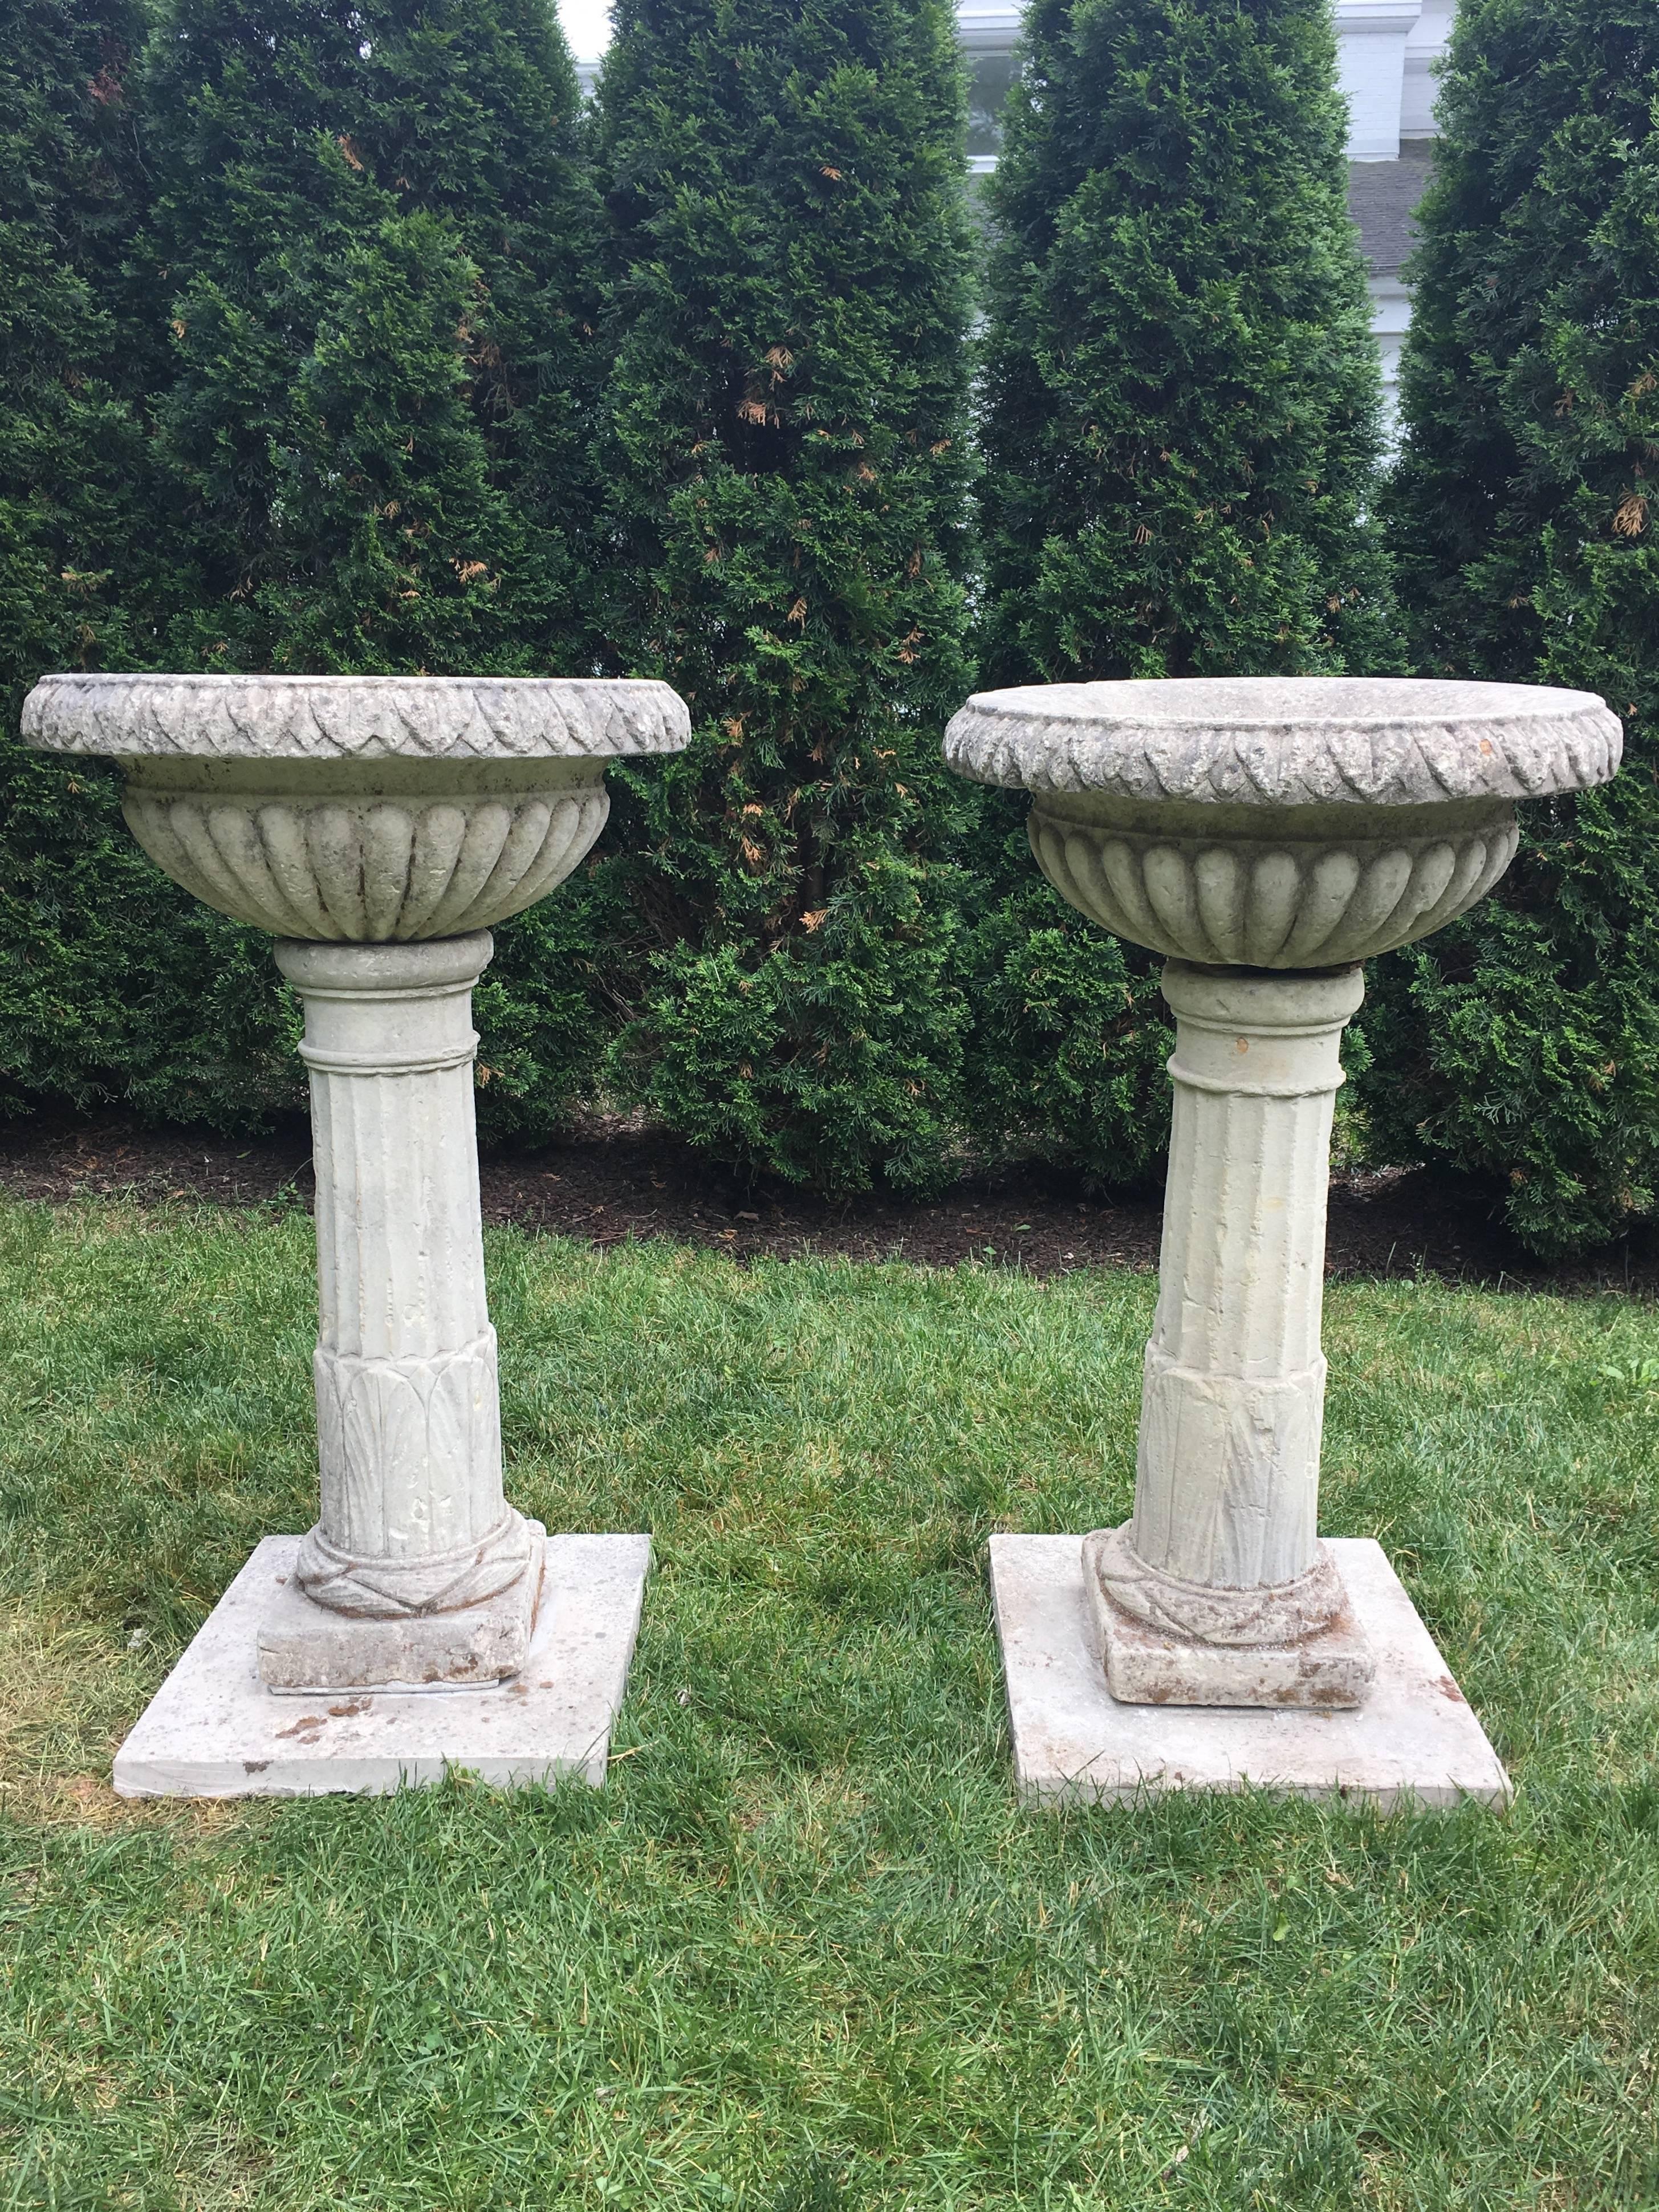 This rare and exceptional pair of carved limestone tazza-form urns on tall fluted pedestals have a storied provenance that dates to the late 18th C and Cornbury Park in Charlbury, Oxfordshire, owned at that time by the Duke of Marlborough. Unique